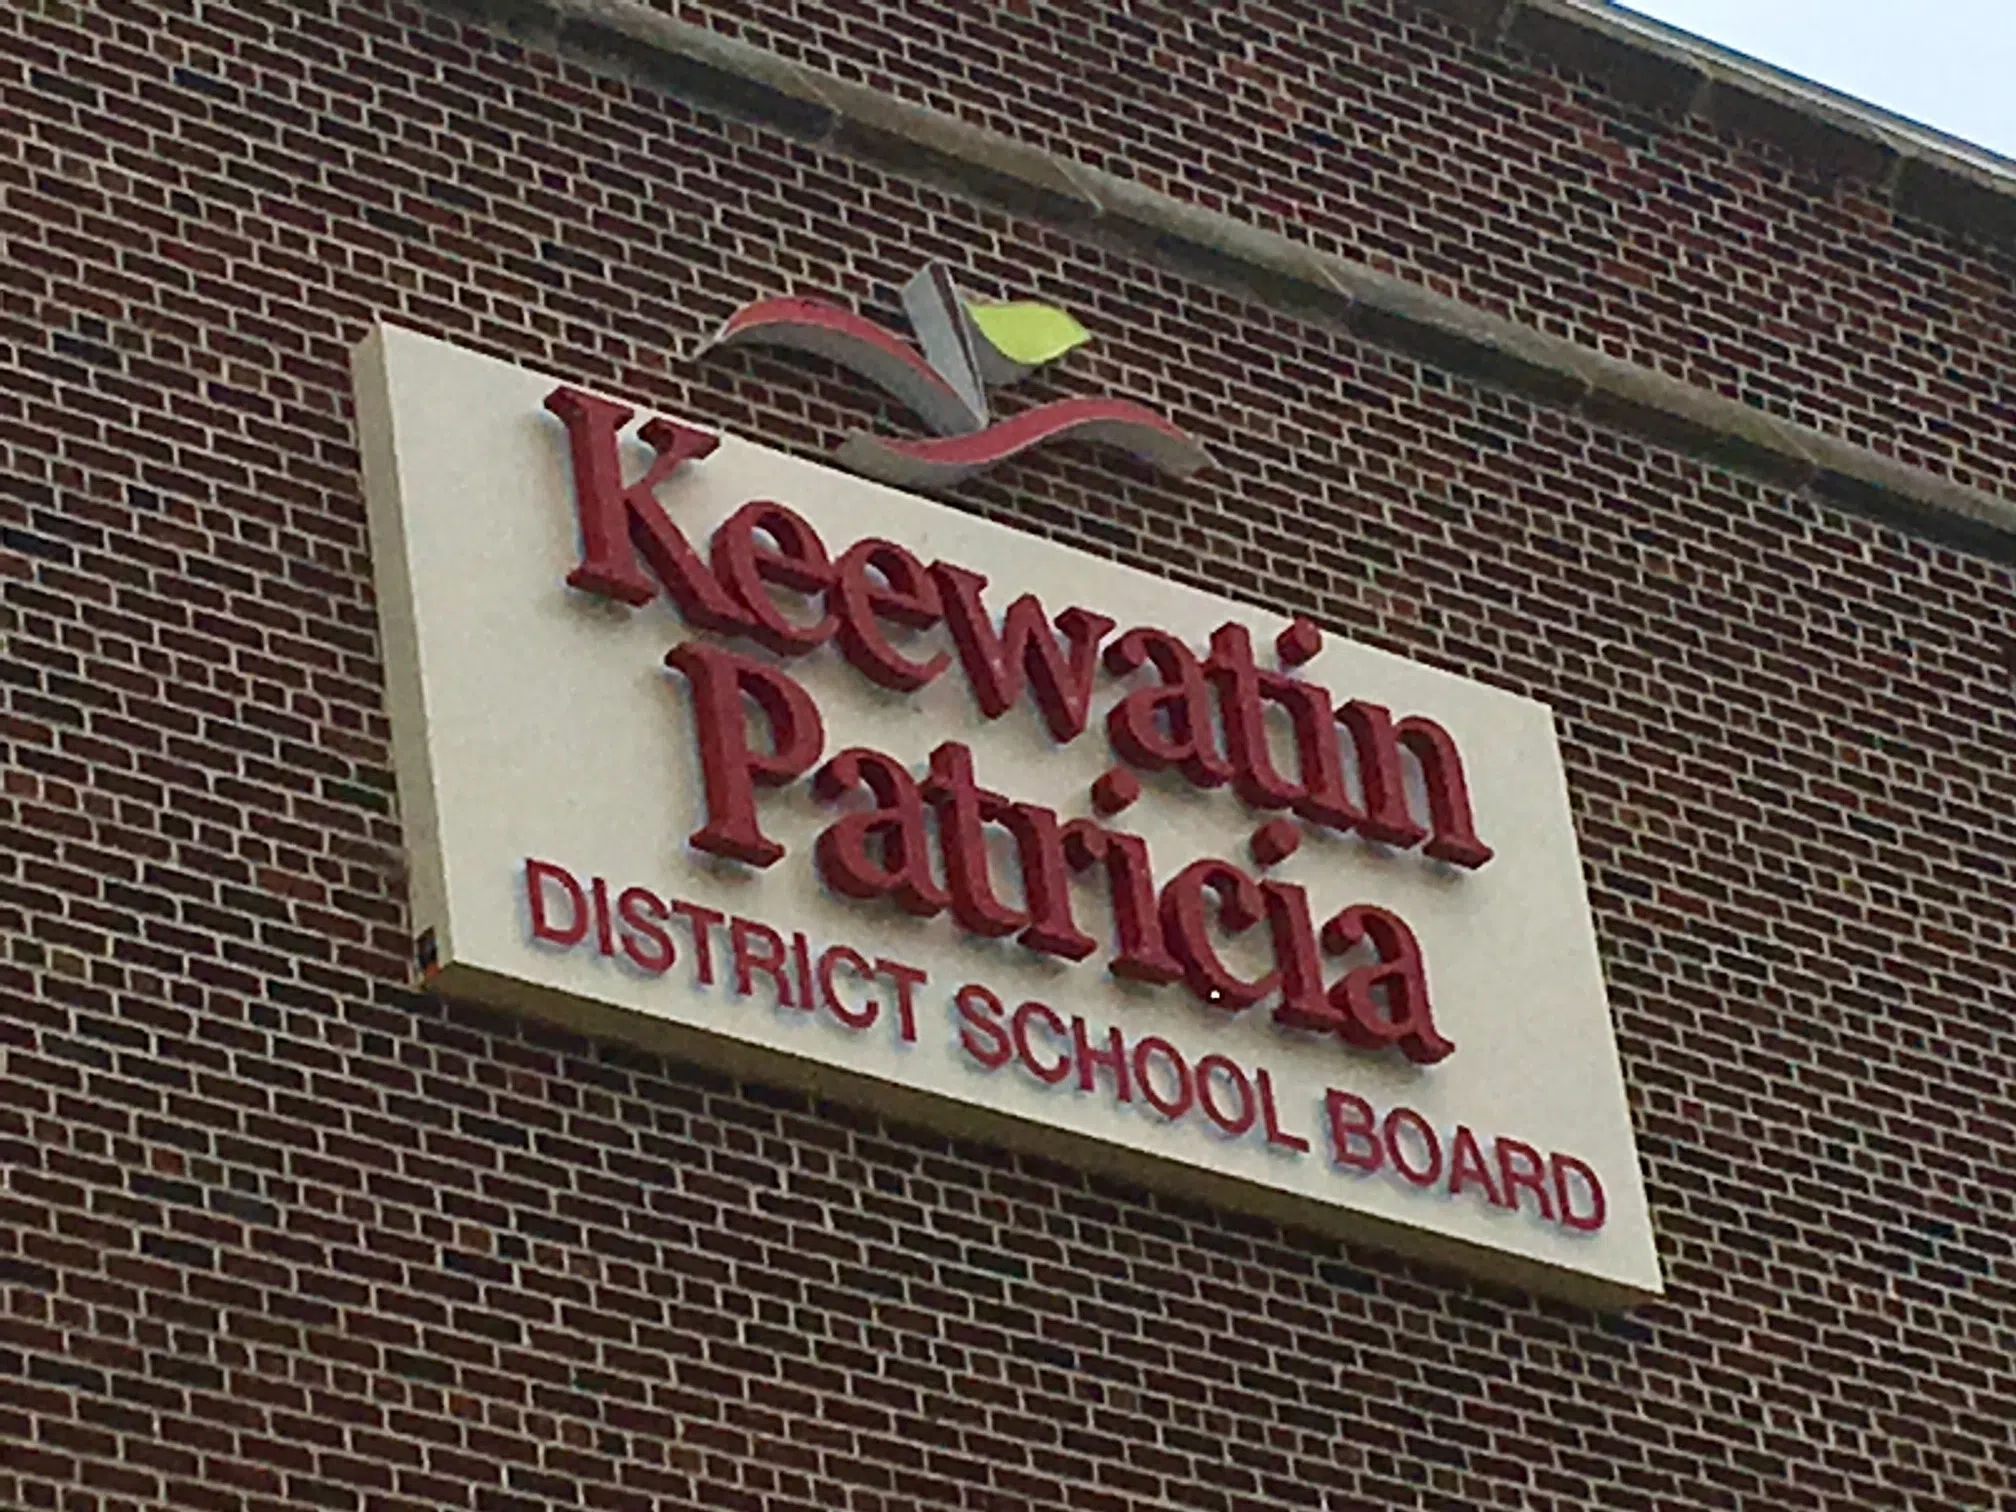 KPDSB expected to present budget this week